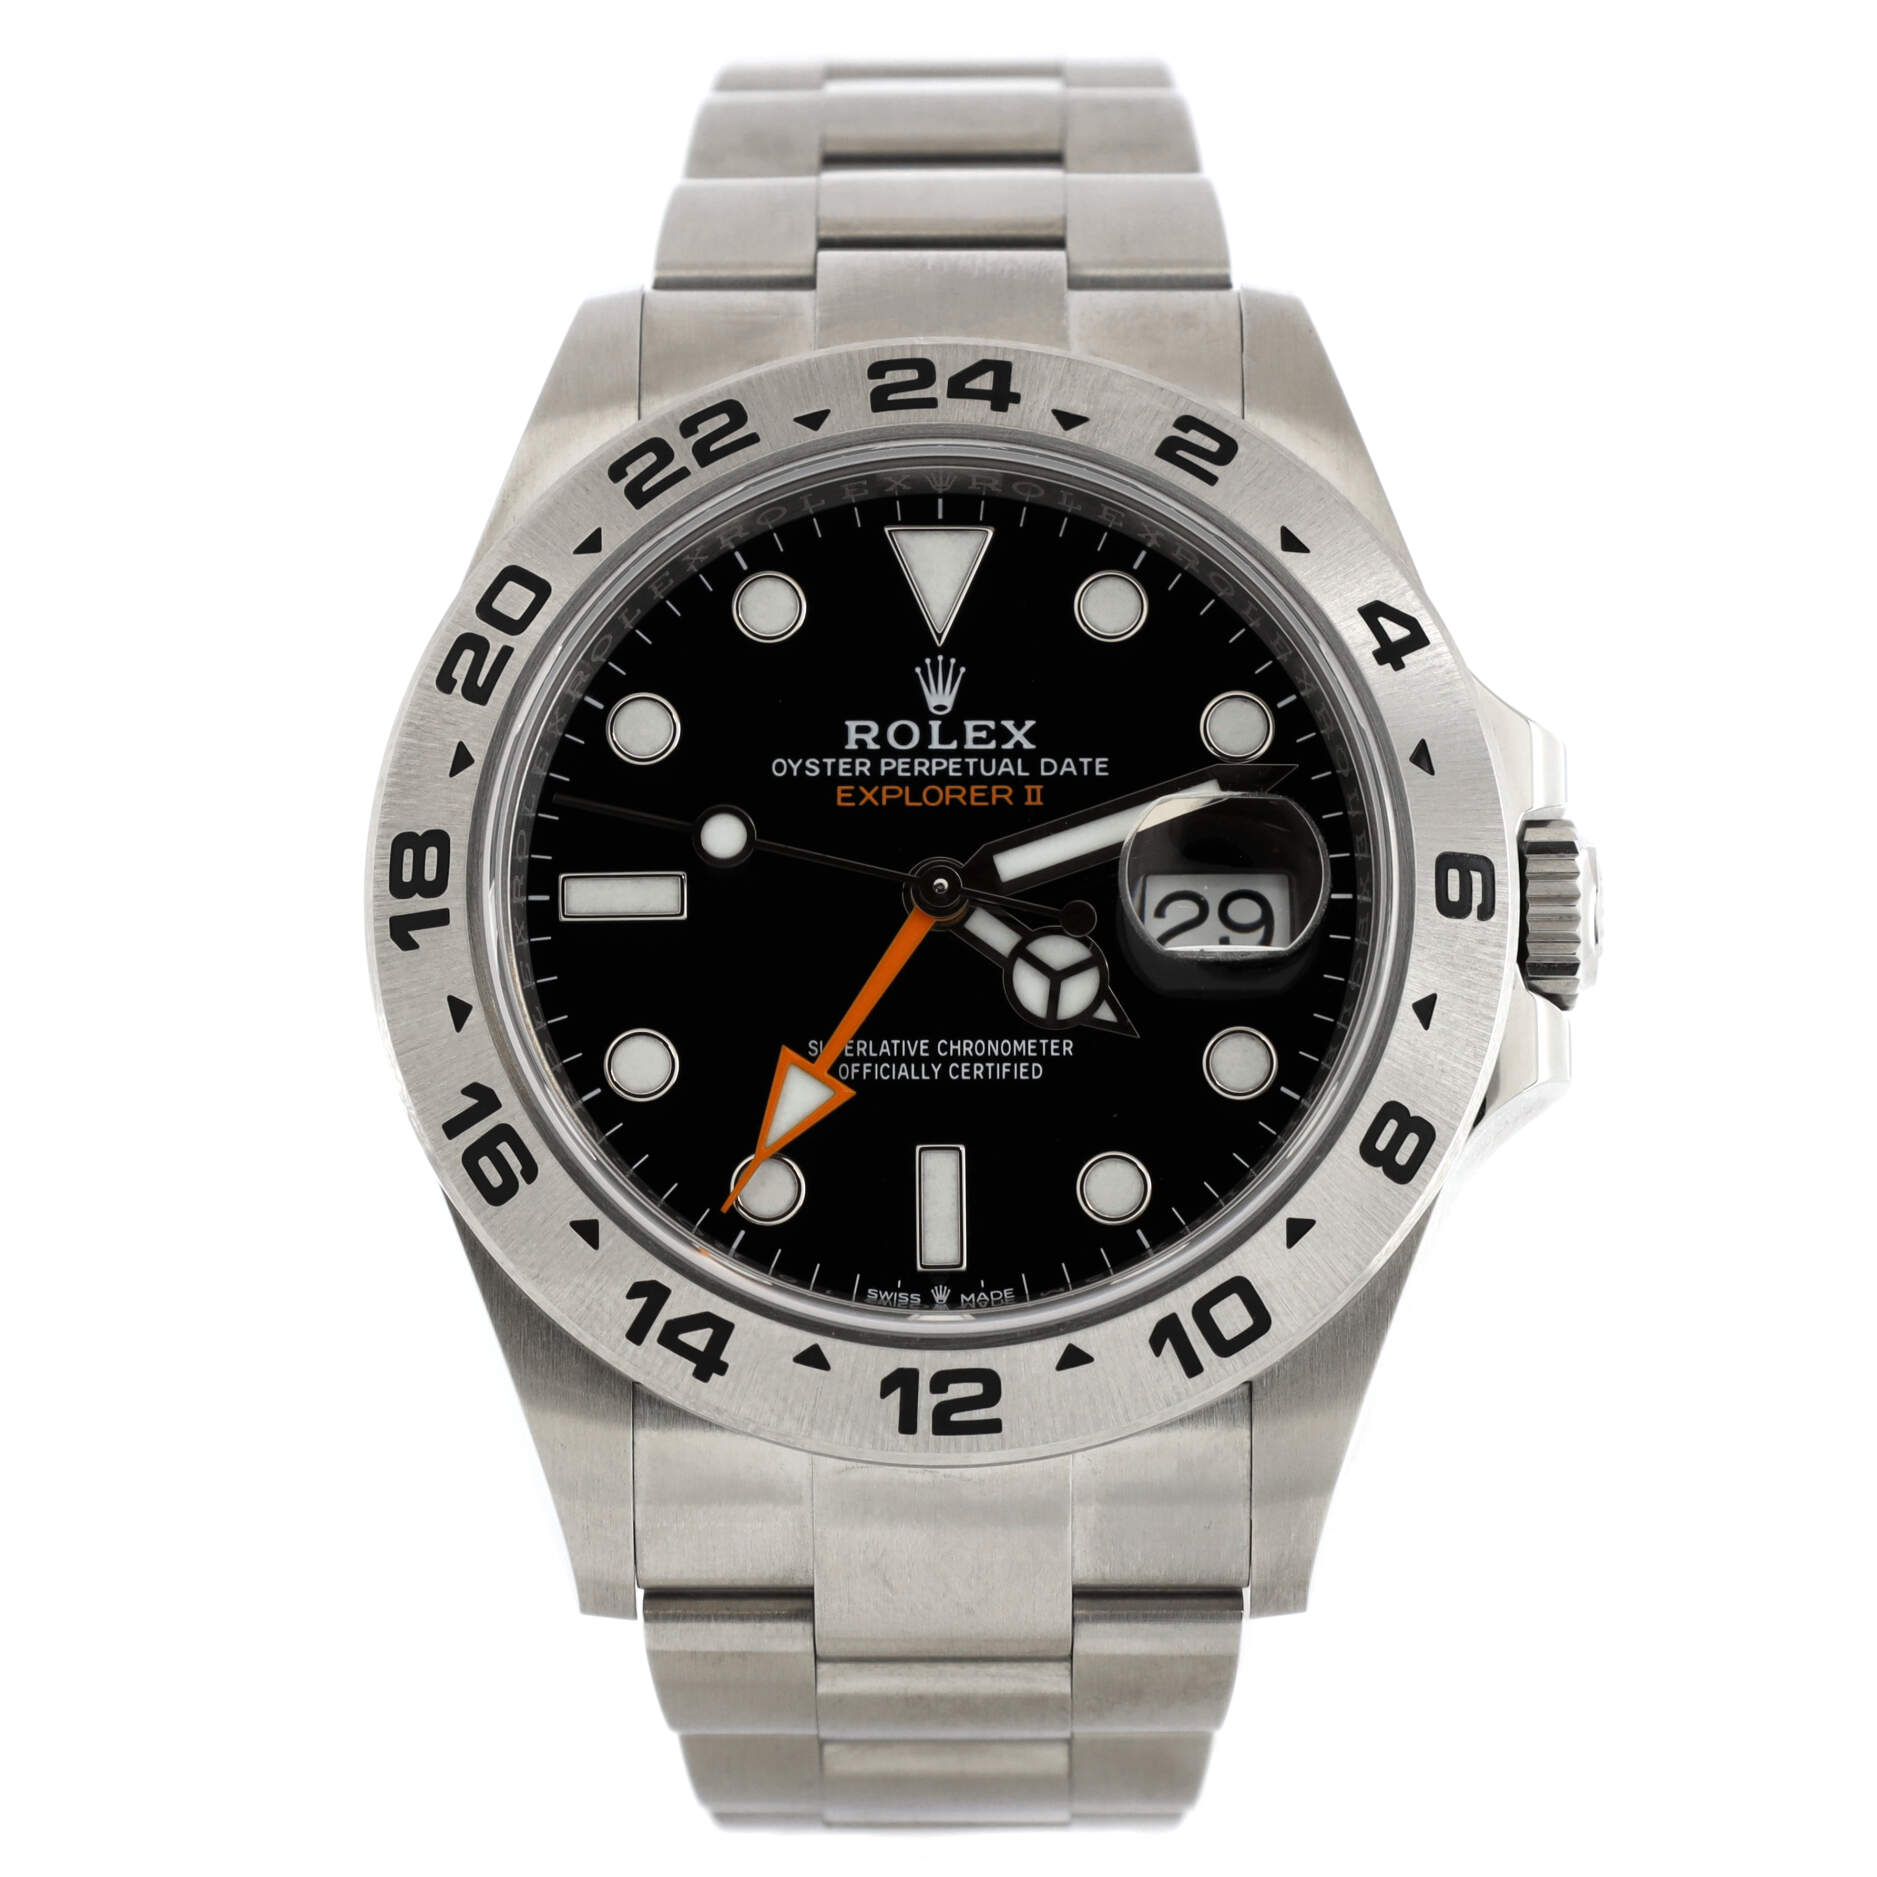 Oyster Perpetual Explorer II Automatic Watch (216570)